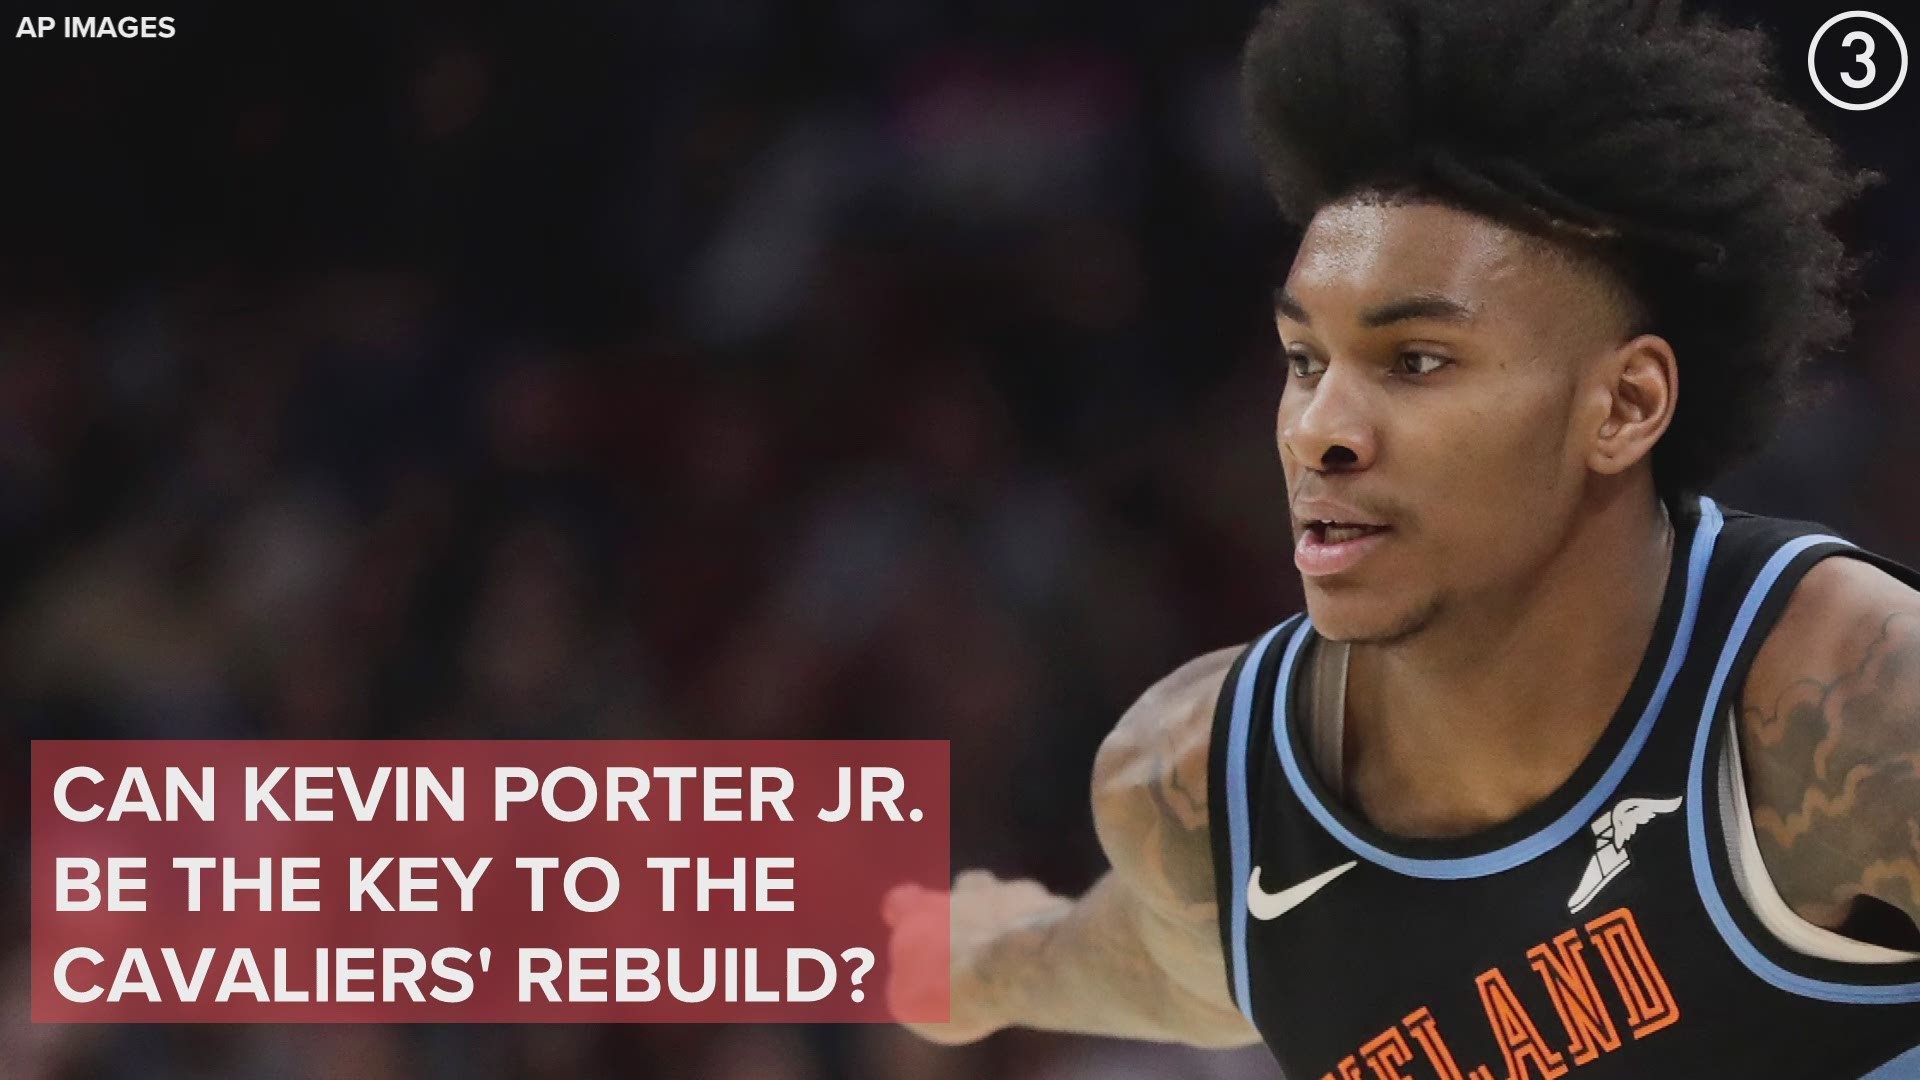 The rookie is stepping-up!  Kevin Porter Jr. scored a career-high 30 points in the Cleveland Cavaliers' 125-119 victory over the Miami Heat on Monday.